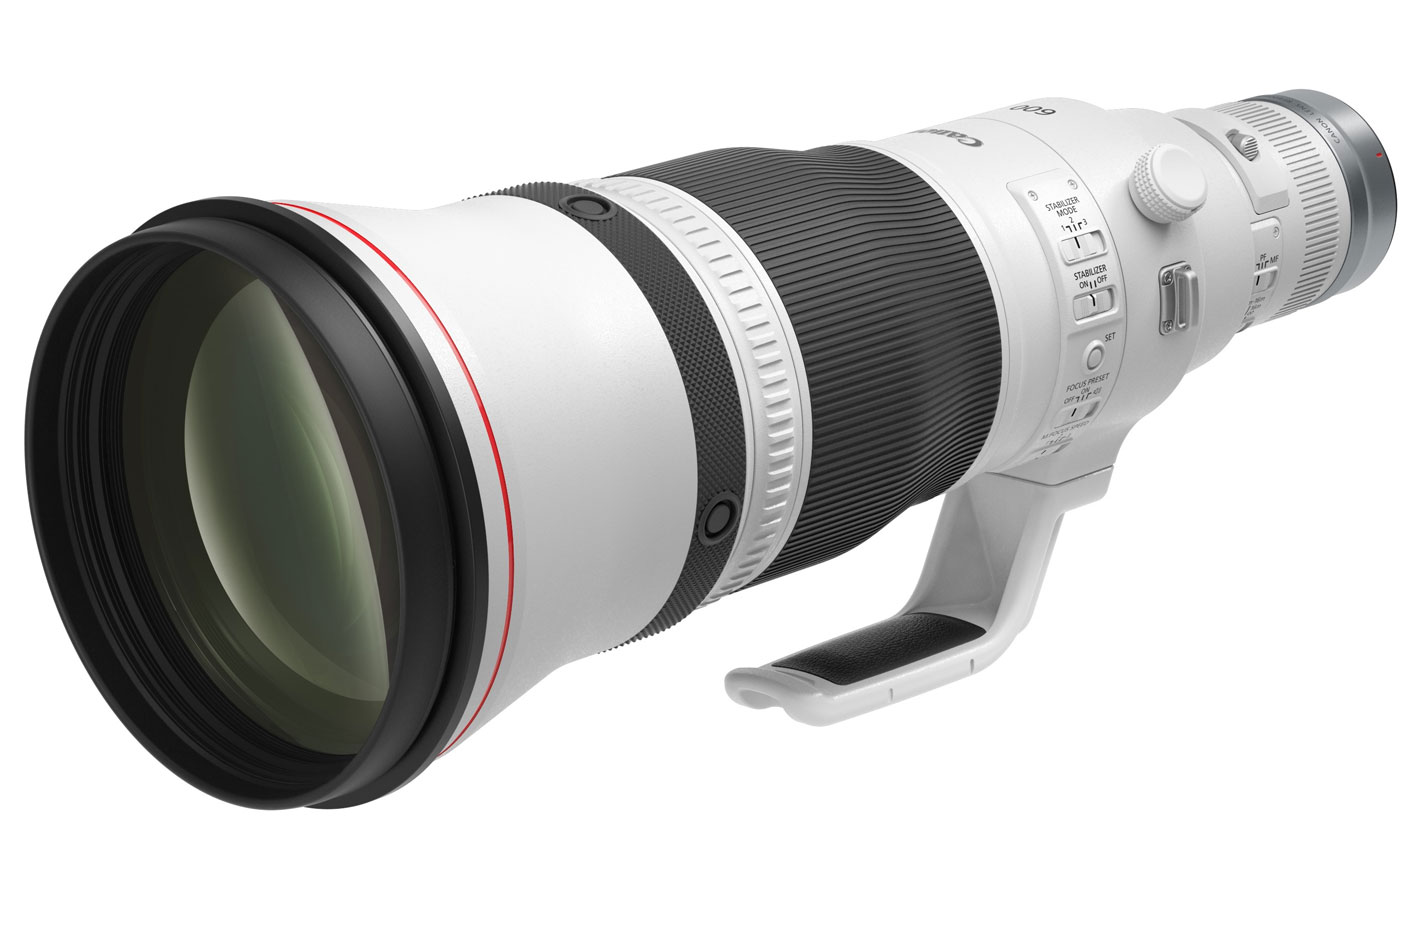 Canon: two fast RF telephotos and a macro which is world’s first